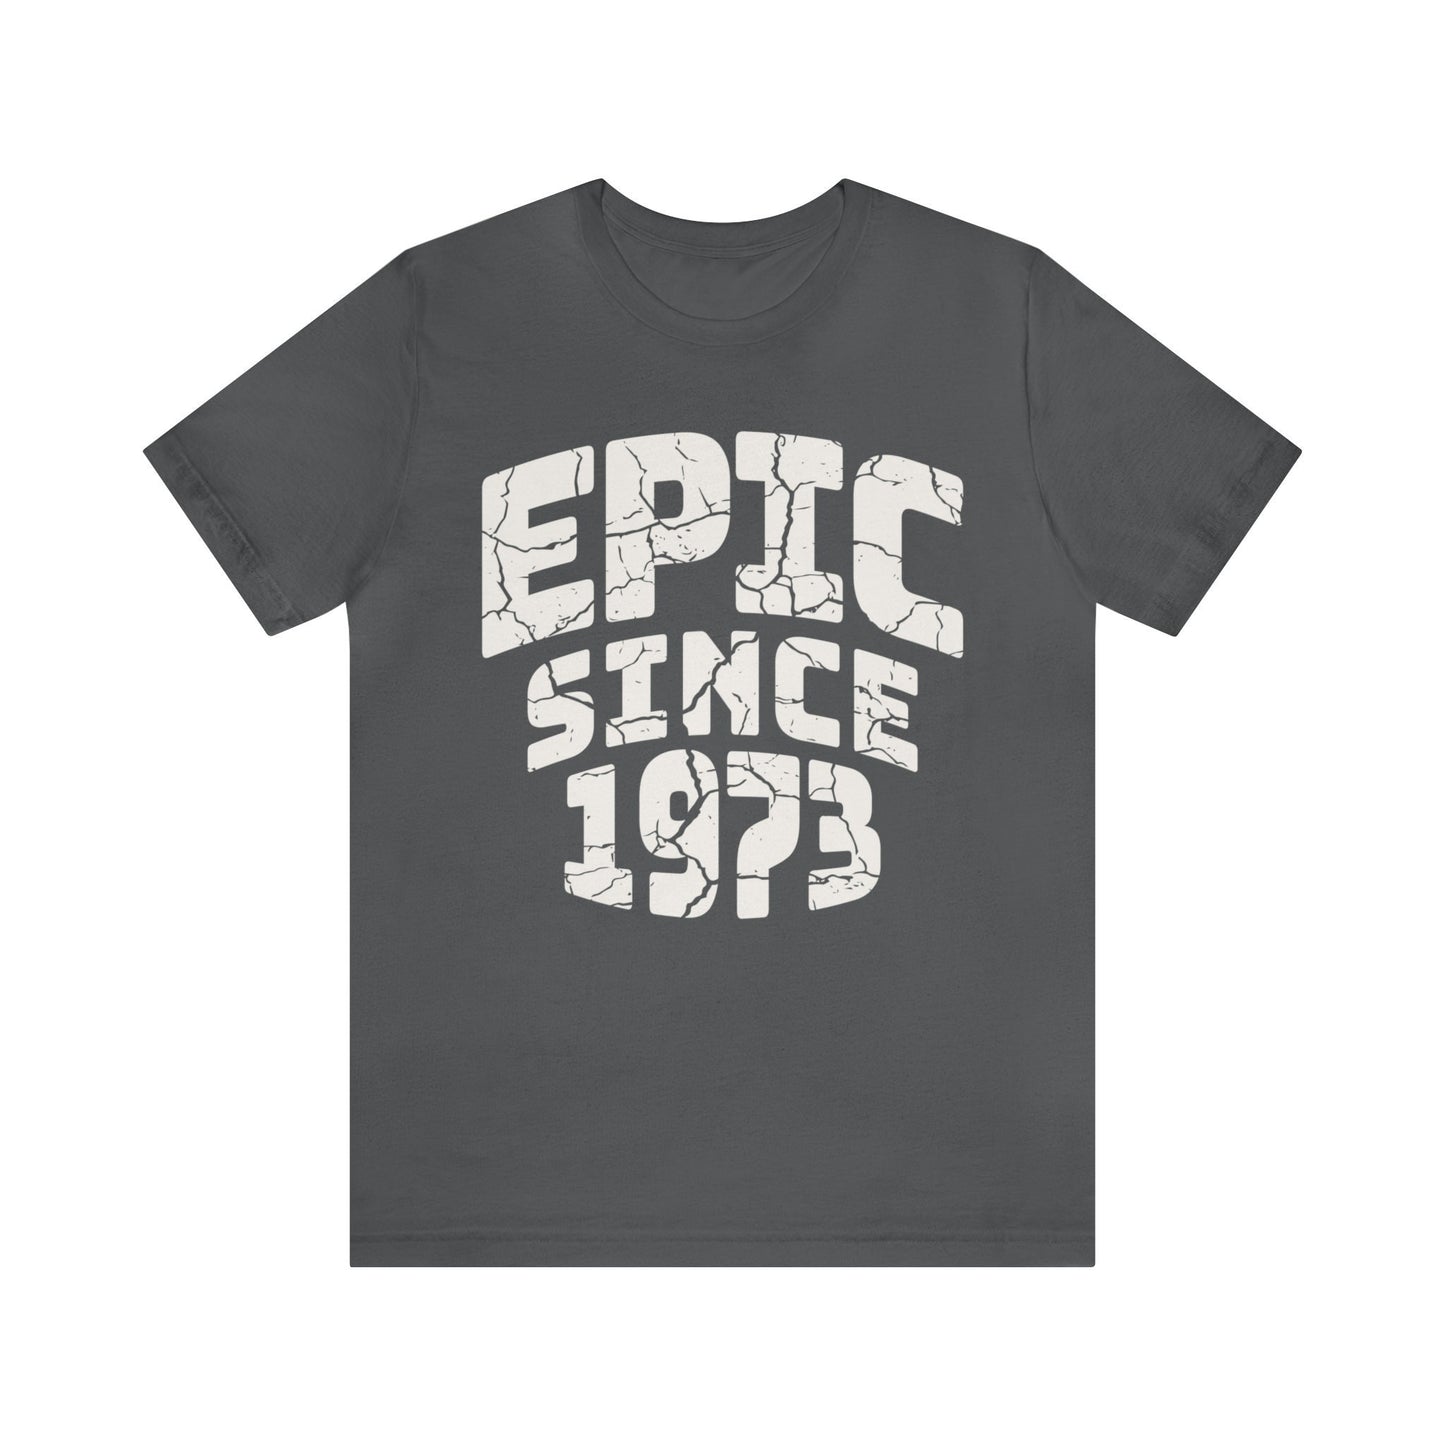 Epic Since 1973 birthday gift for Man or Husband, 50th Birthday t-shirt for Father